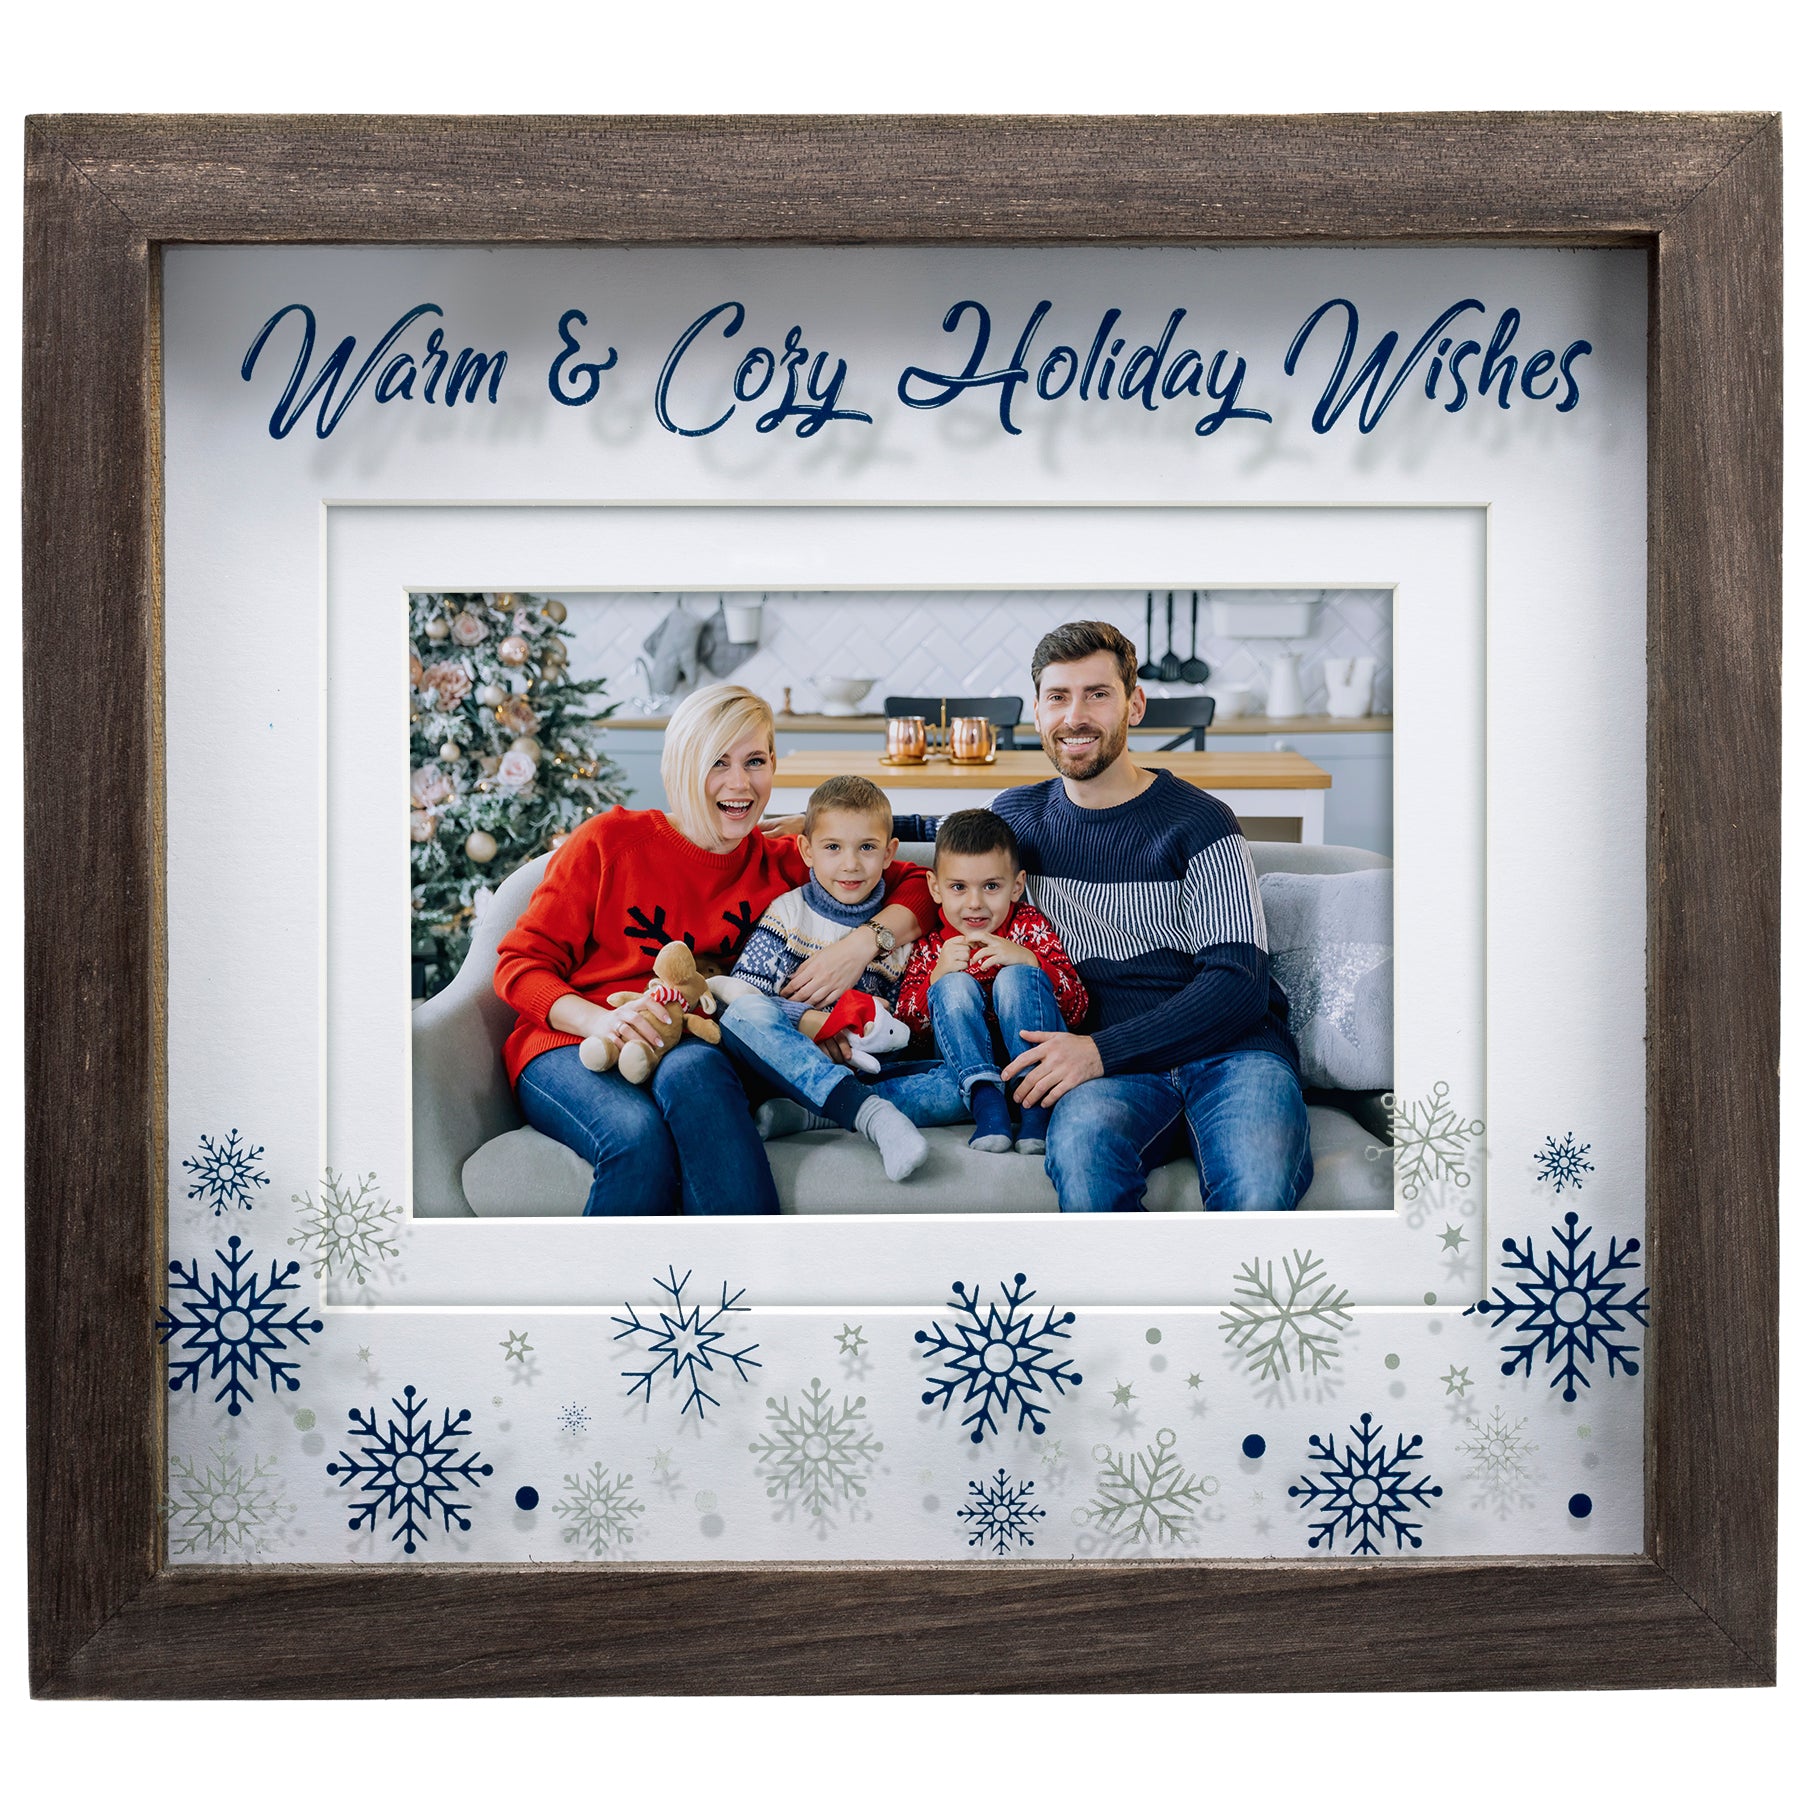 Warm & Cozy Holiday 6" x 4" or 7" x 5" Picture Frame